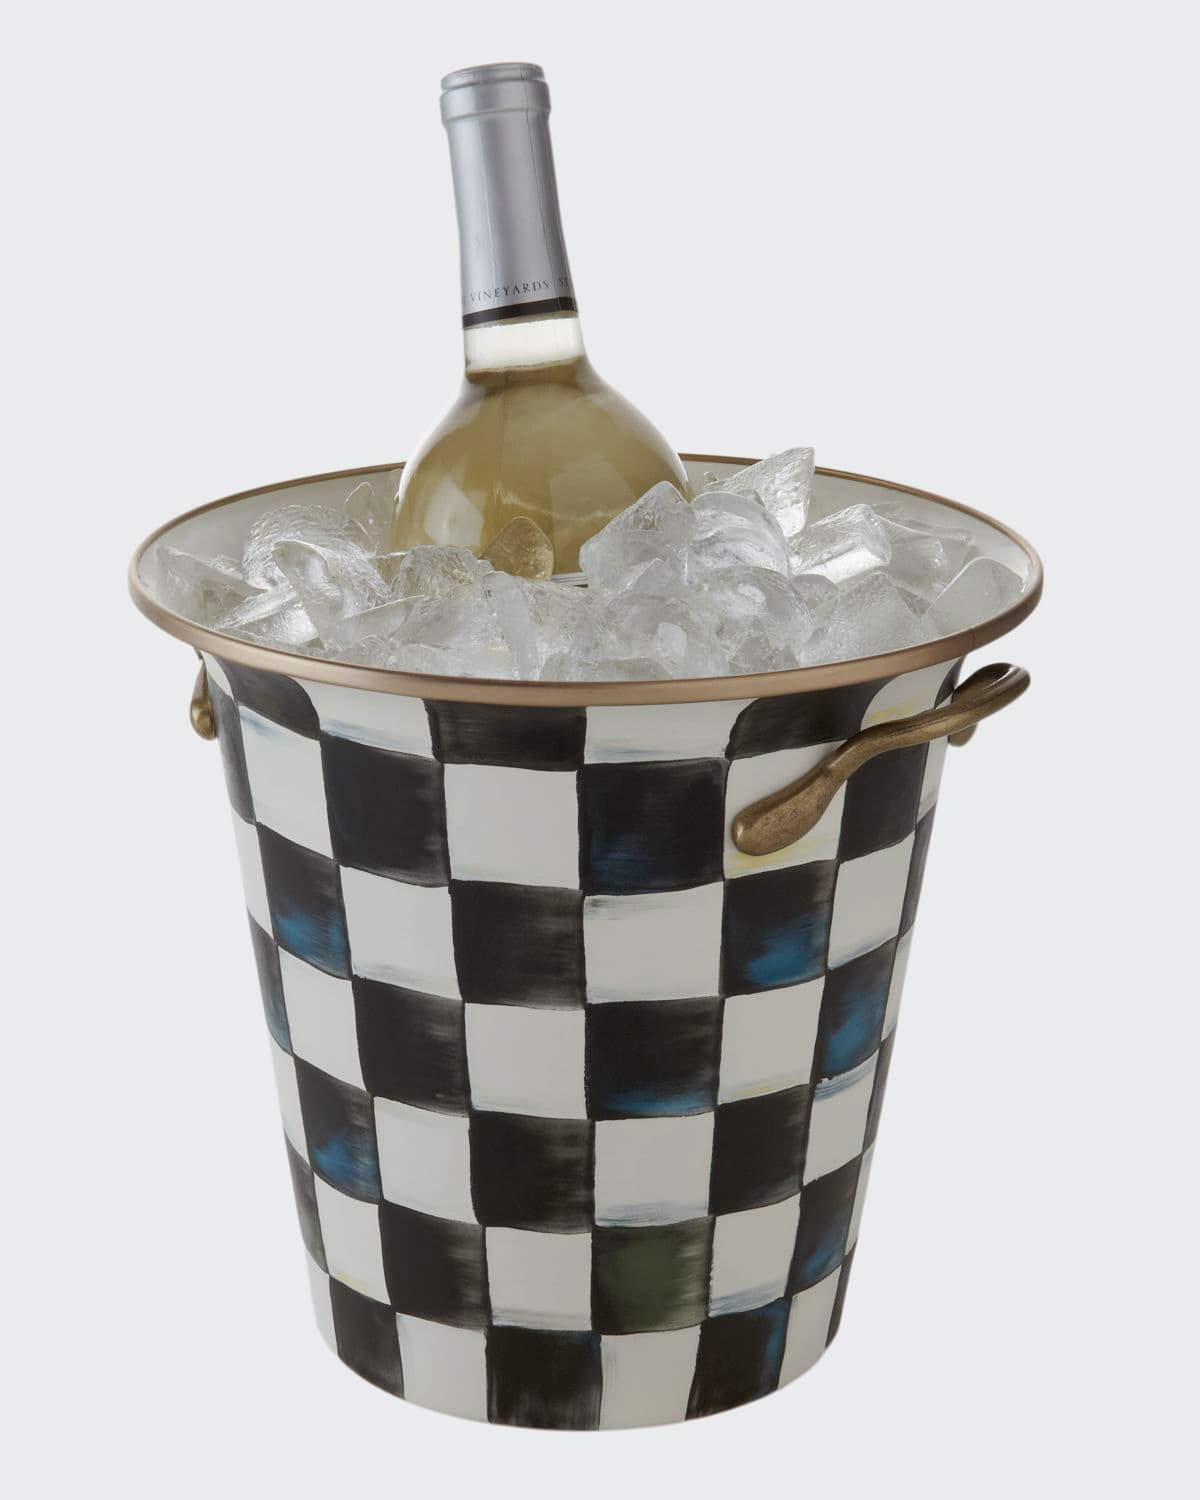 Mackenzie-childs Courtly Check Enamel Wine Cooler